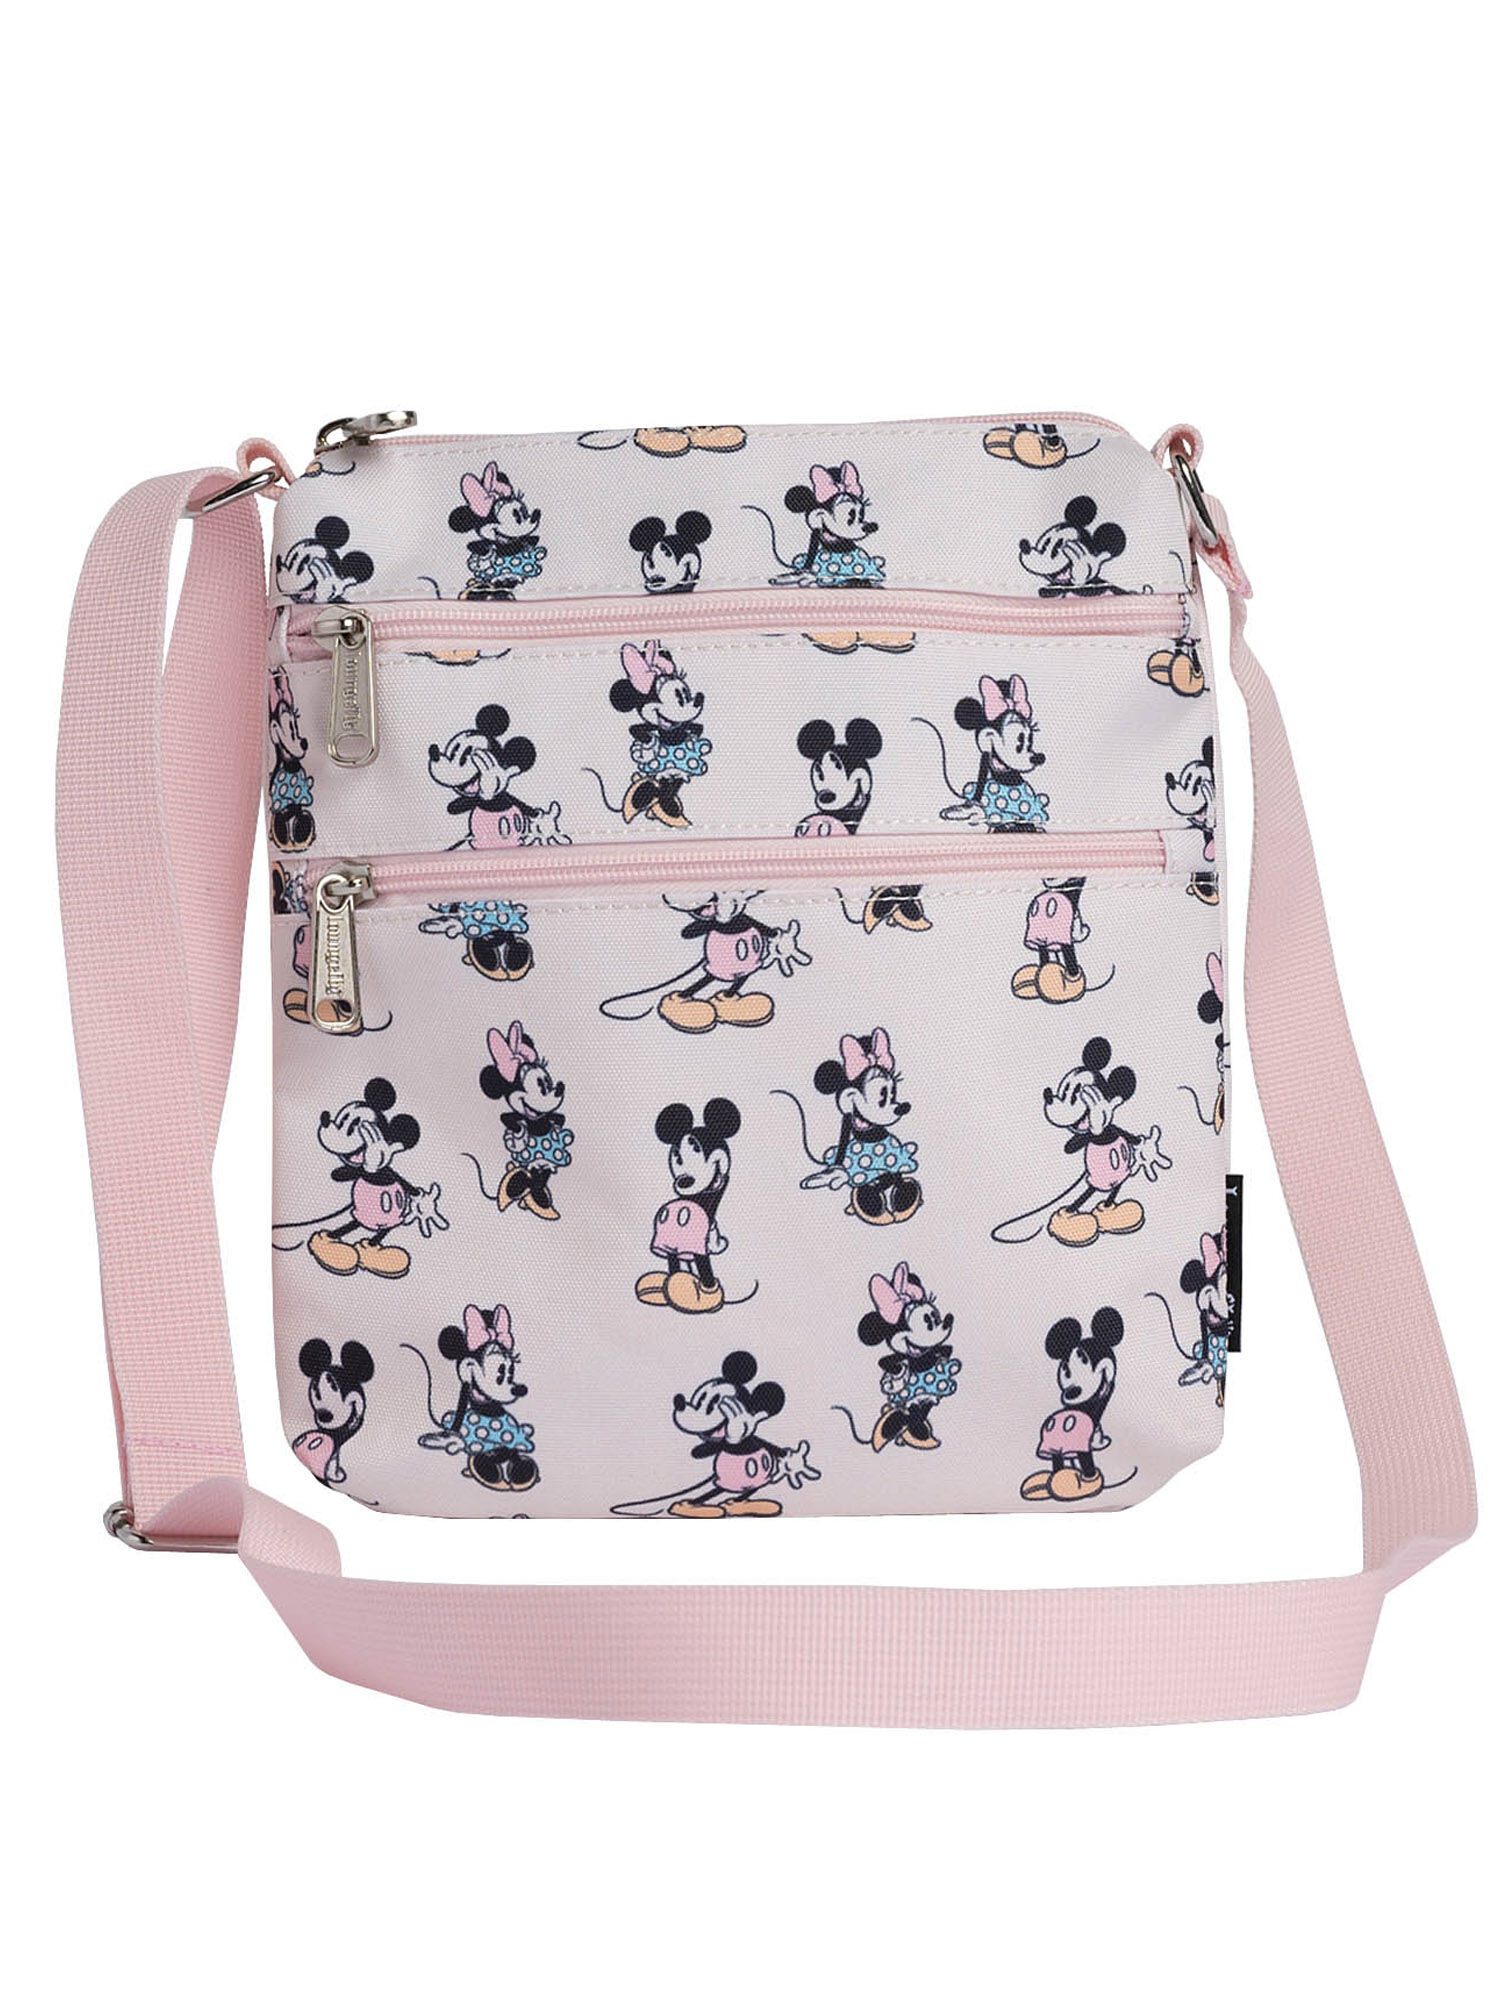 Mickey Mouse Mickey & Minnie Pastel Passport Bag-LOUWDTB1826-LOUNGEFLY 